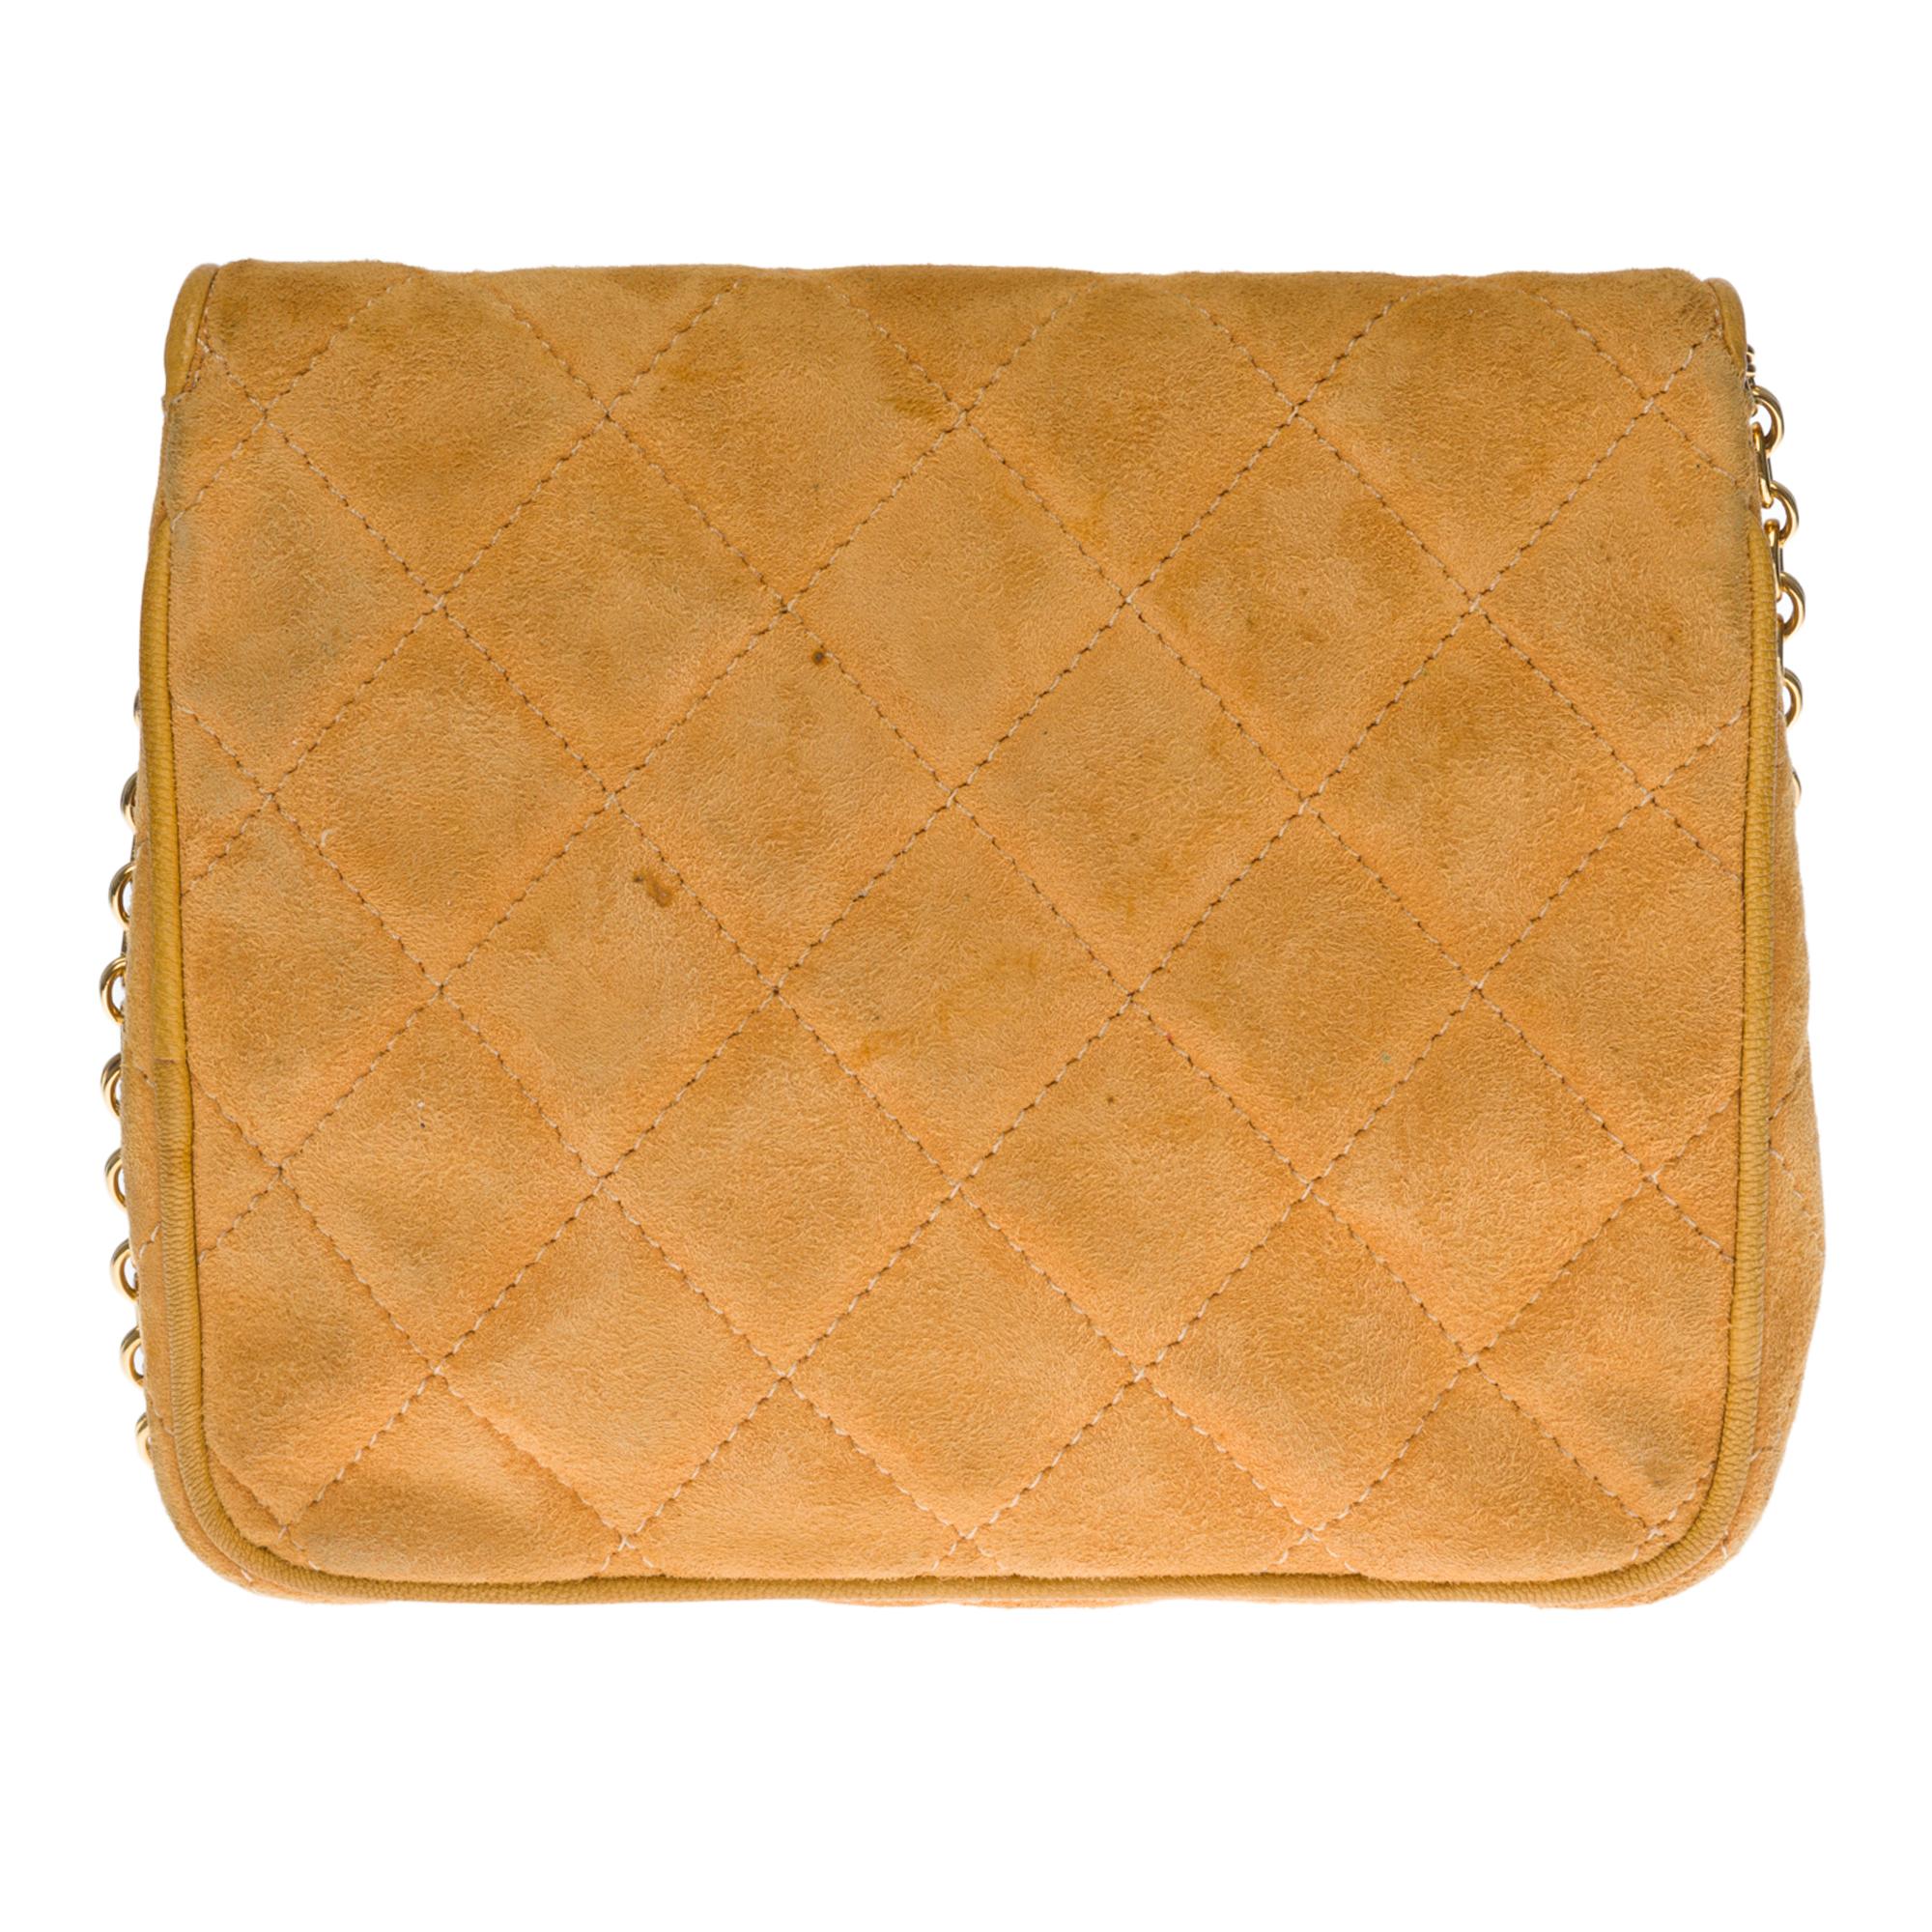 Lovely Chanel Classique Mini Shoulder Bag in beige quilted suede, gold-tone metal hardware, gold-tone metal chain handle for shoulder support
Flap closure, snap closure
Lining in beige leather, one zipped pocket
Signature: 